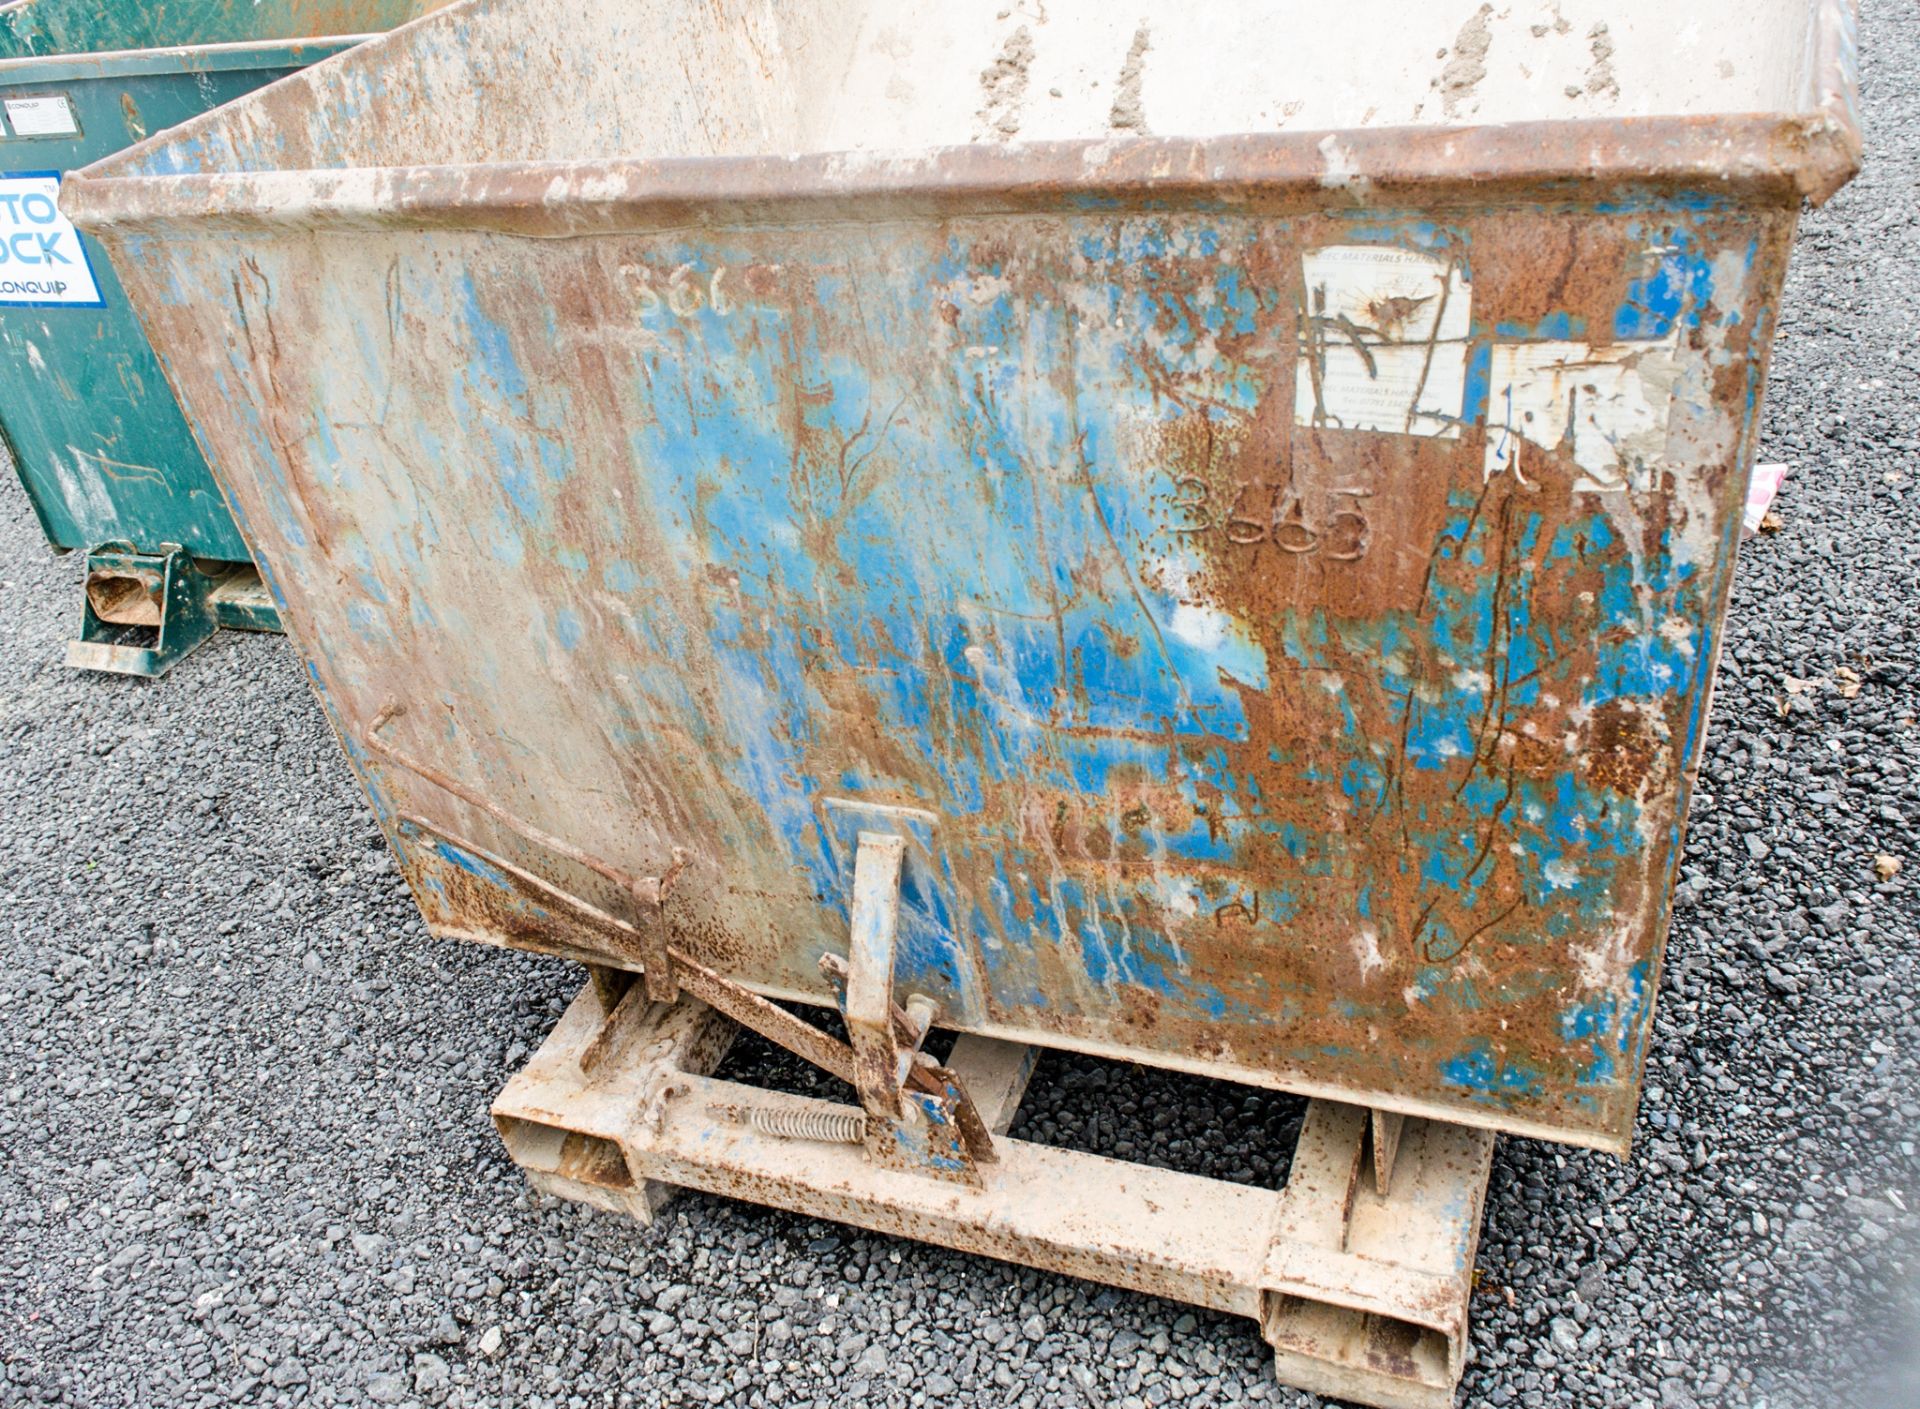 DTEC tipping skip - Image 2 of 2